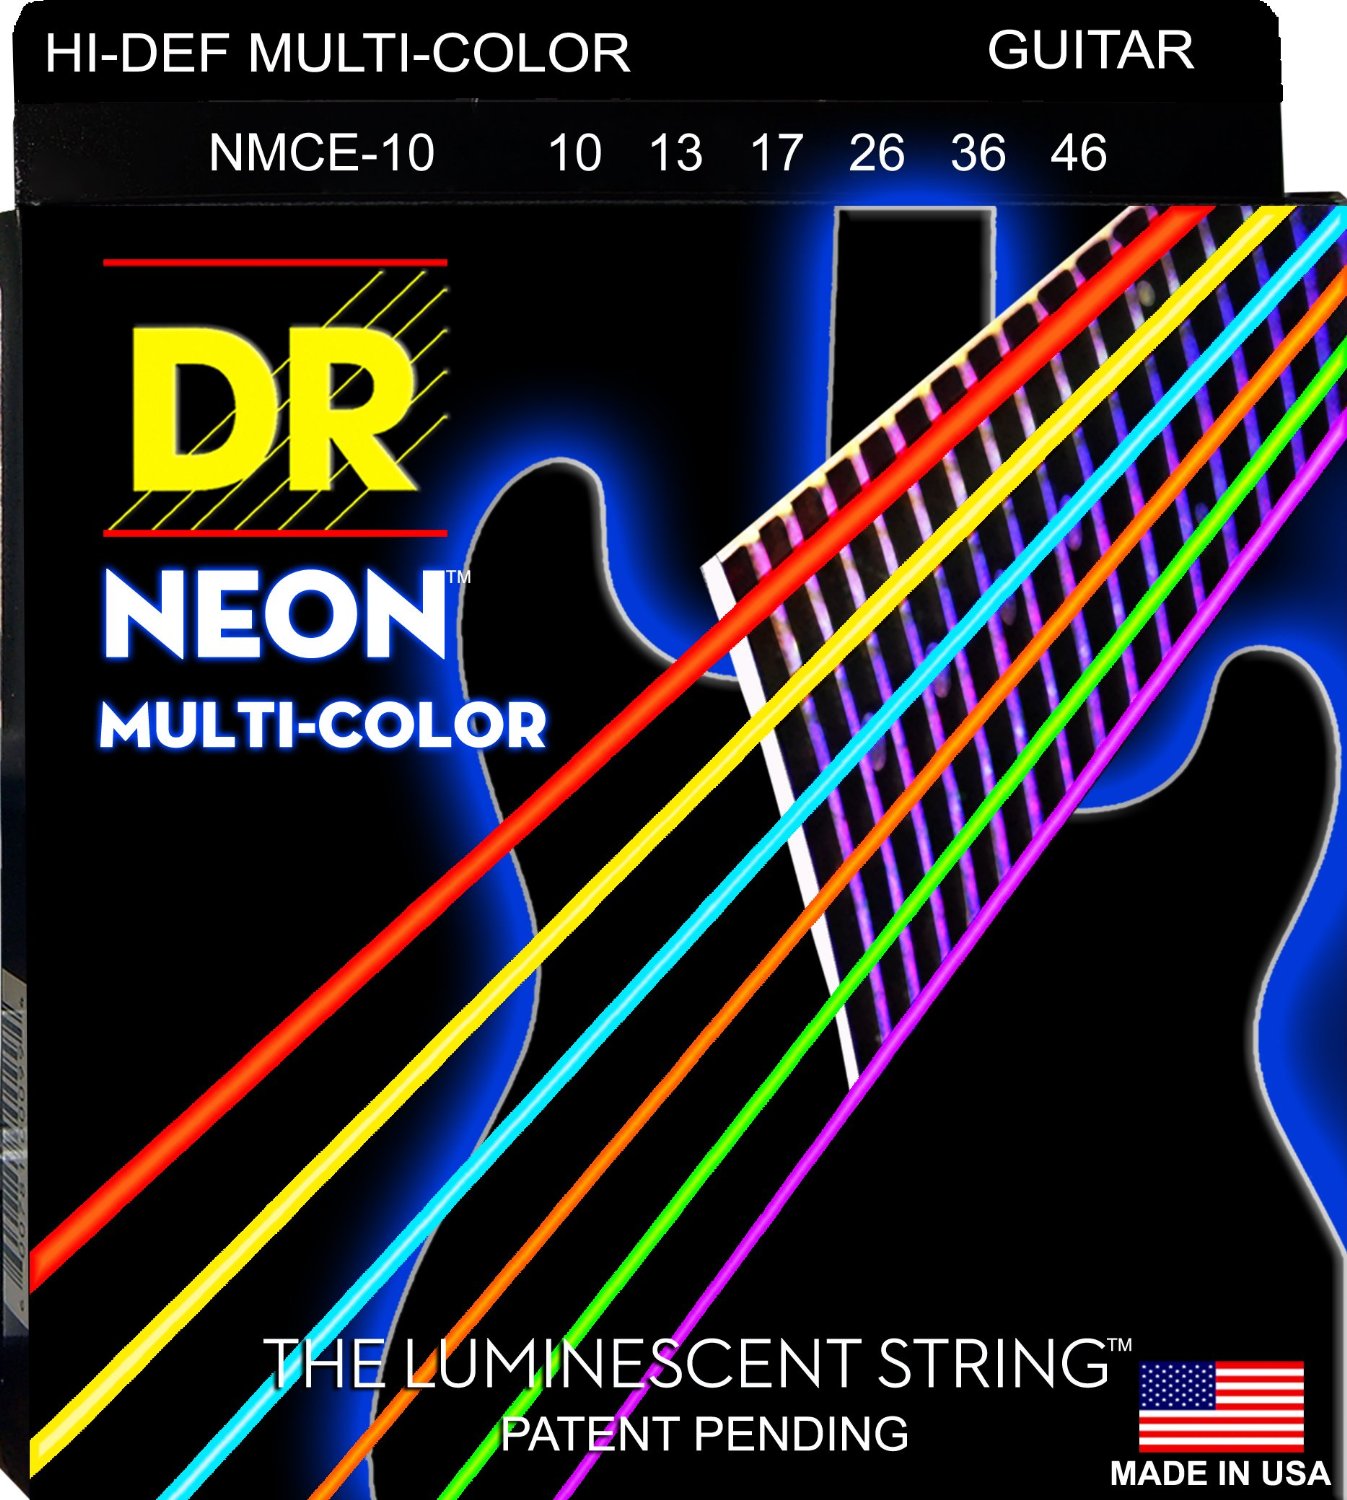 best gifts for guitar players: Neon Guitar Strings